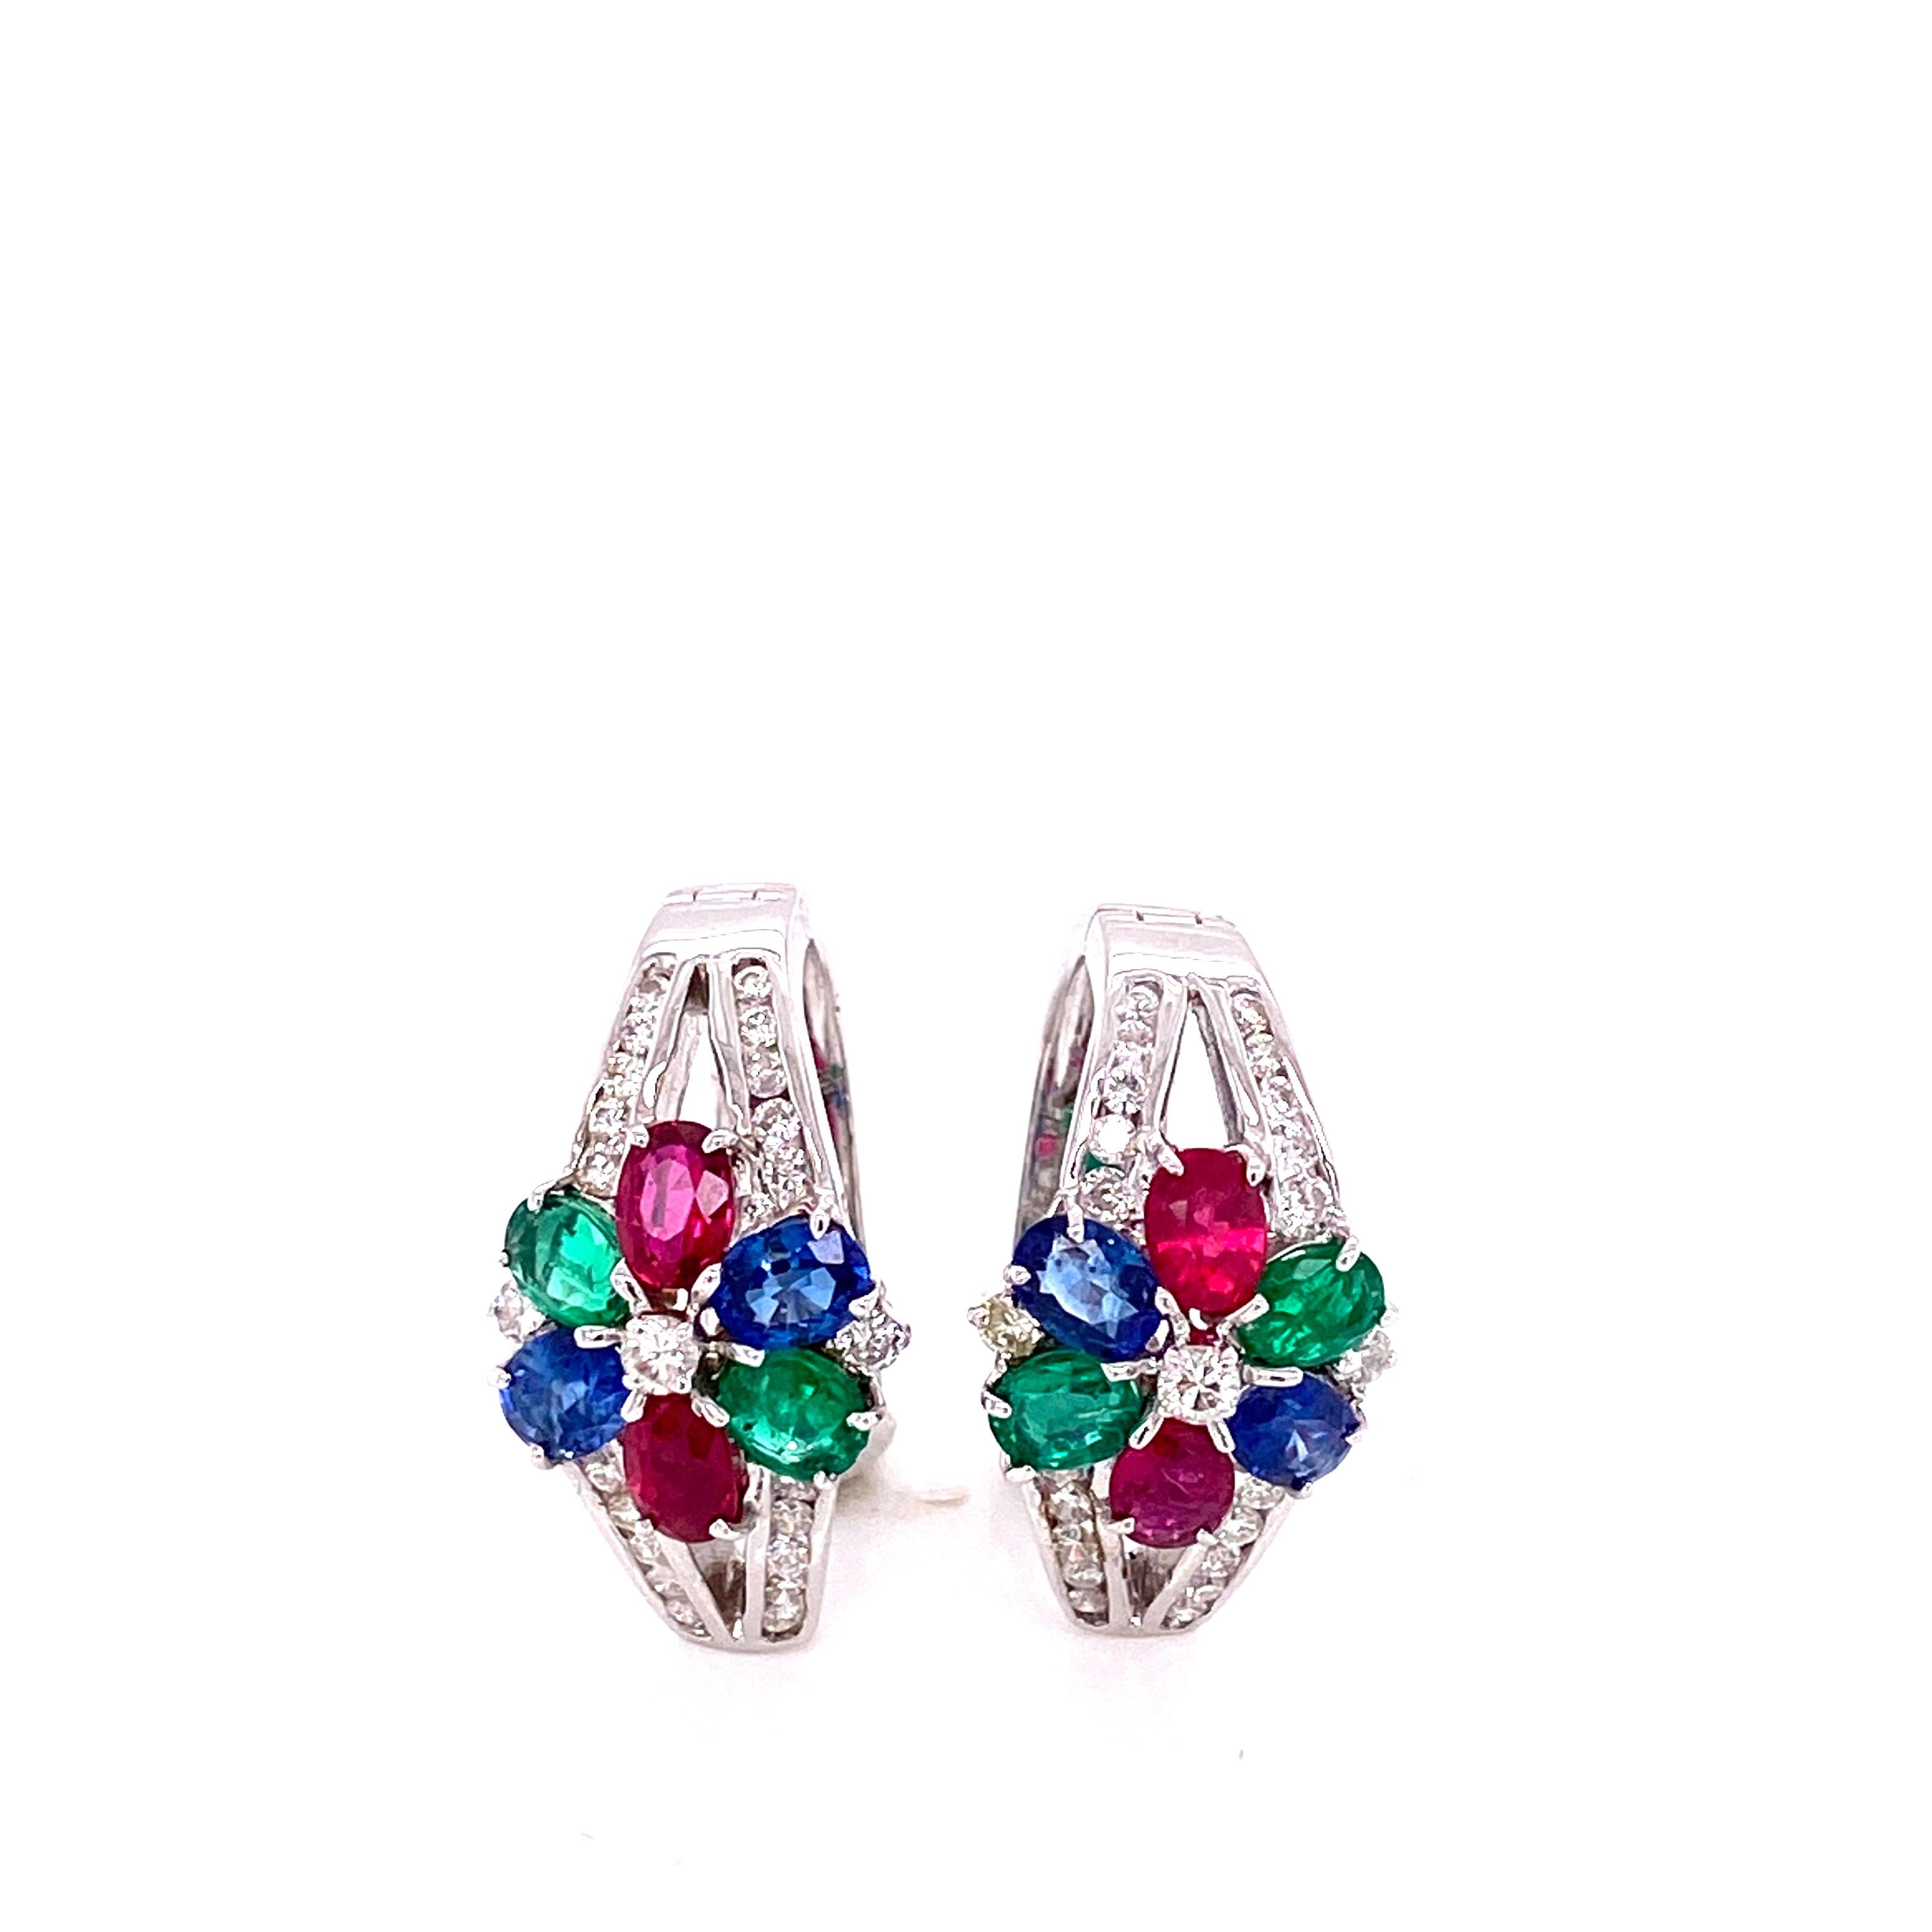 Art-Deco Style Emerald, Ruby, Blue Sapphire, and White Diamond Earrings:

A gorgeous pair of earrings, it features 0.86 carat of rubies, 0.74 carat of sapphires, 0.56 carat of emeralds, and 0.59 carat of white round brilliant diamonds. The rubies,